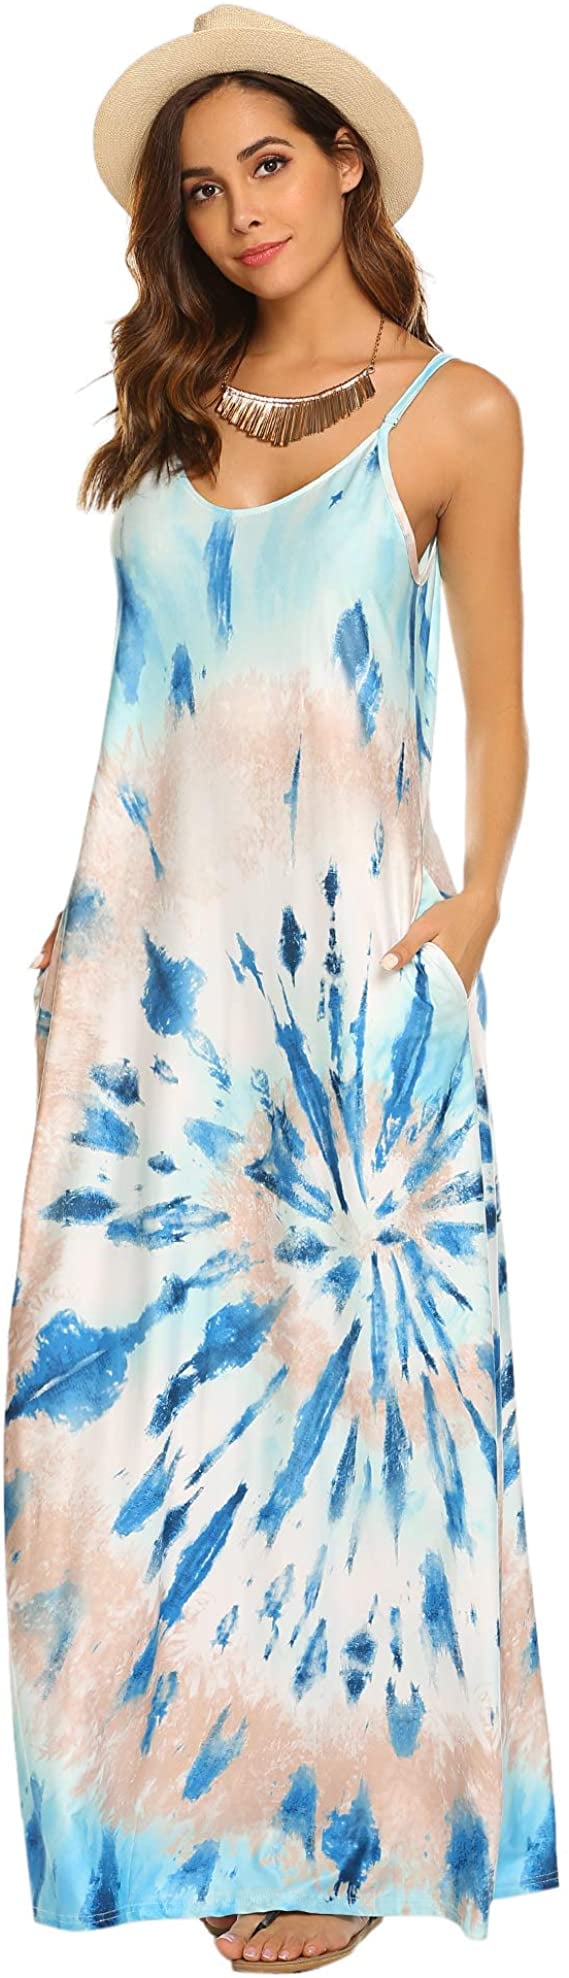 Ours Casual Tie-Dye Maxi Dress